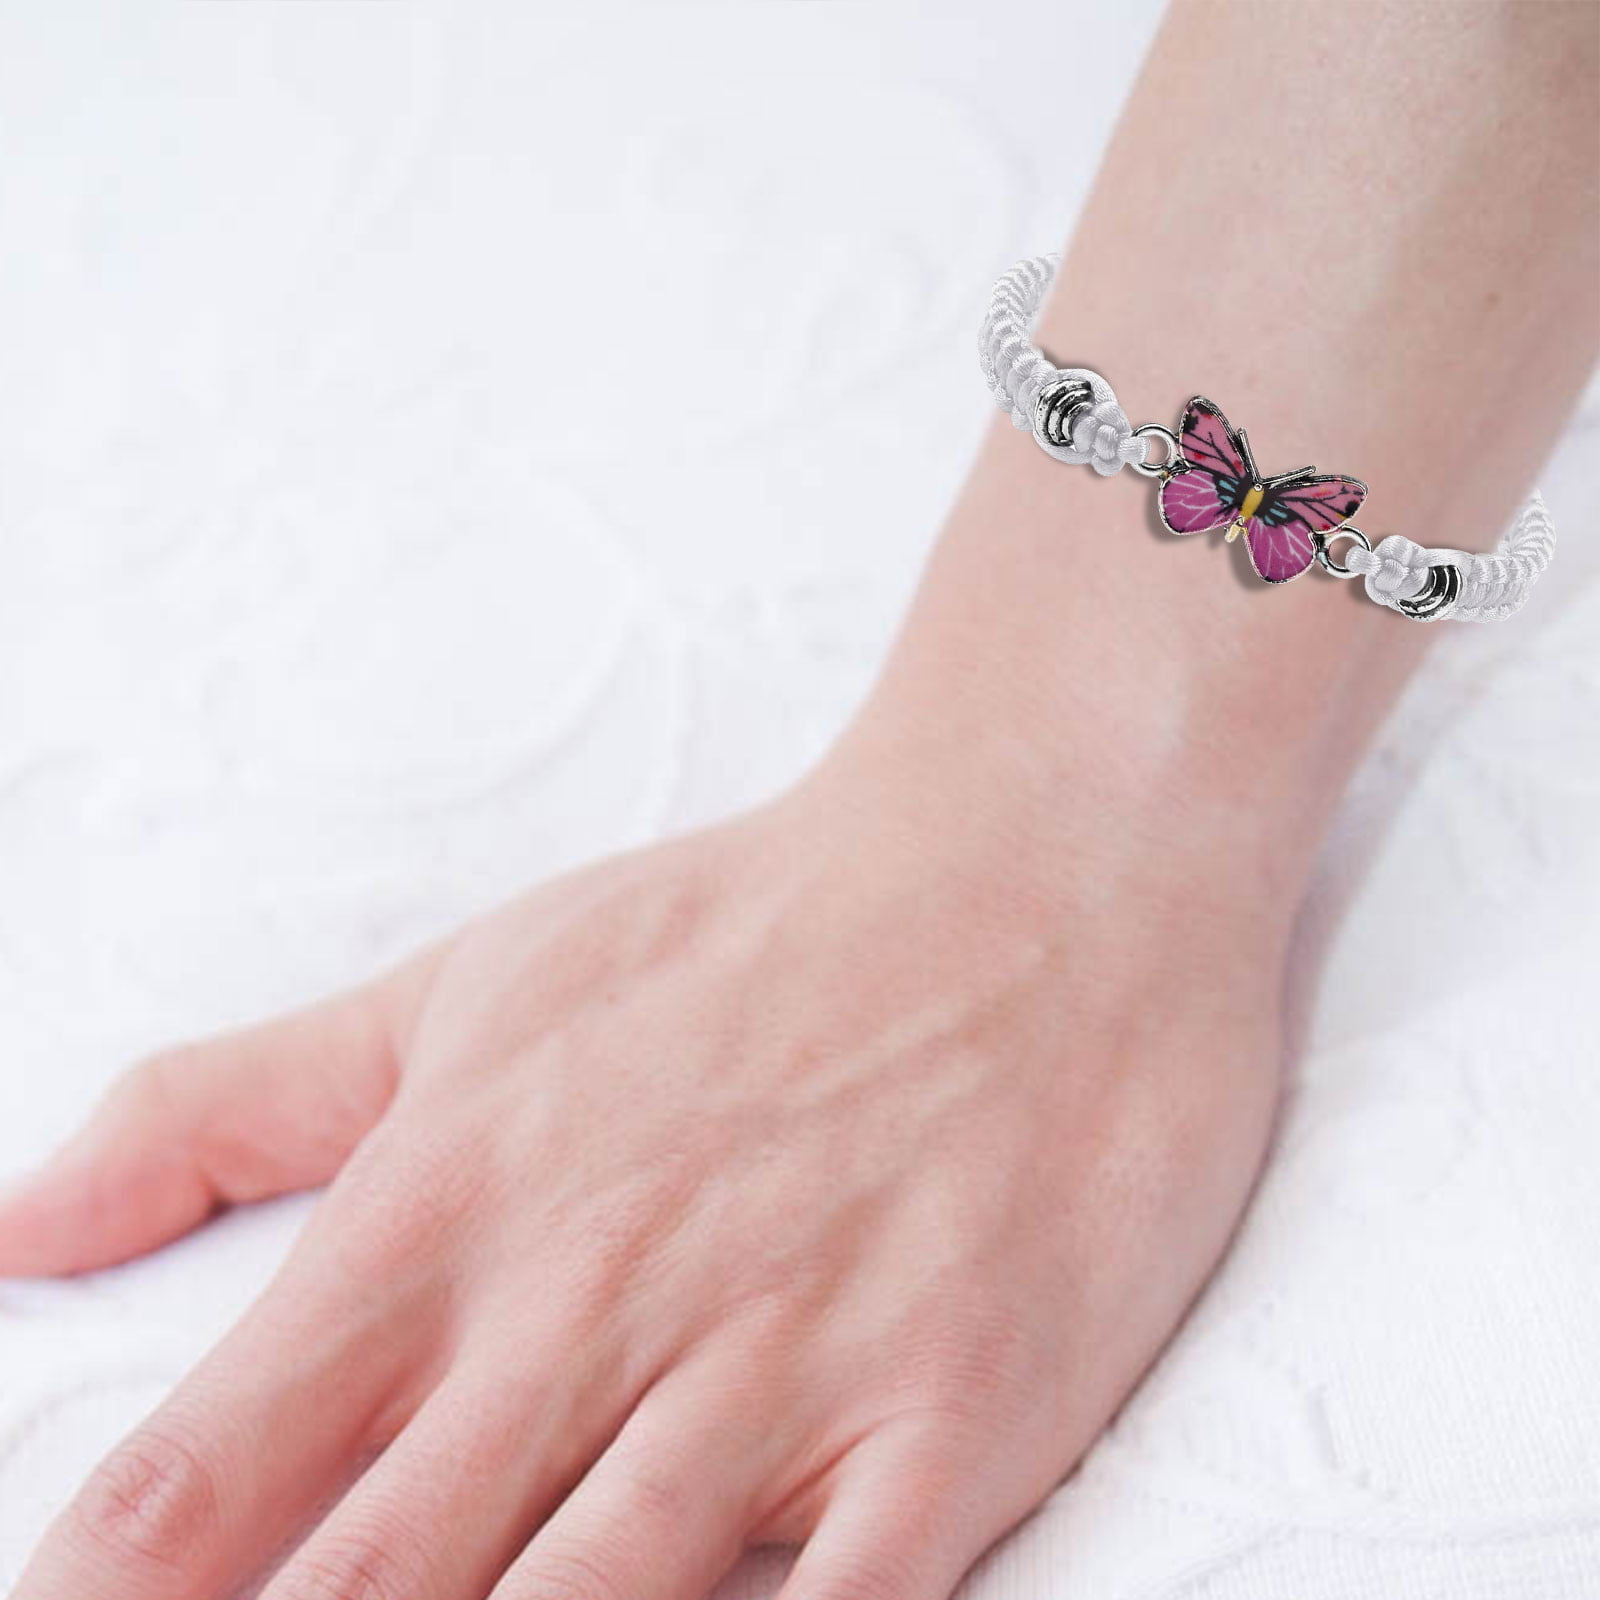 Pandora Moments Heart and Butterfly Bangle with cubic zirconia stud | Vinted